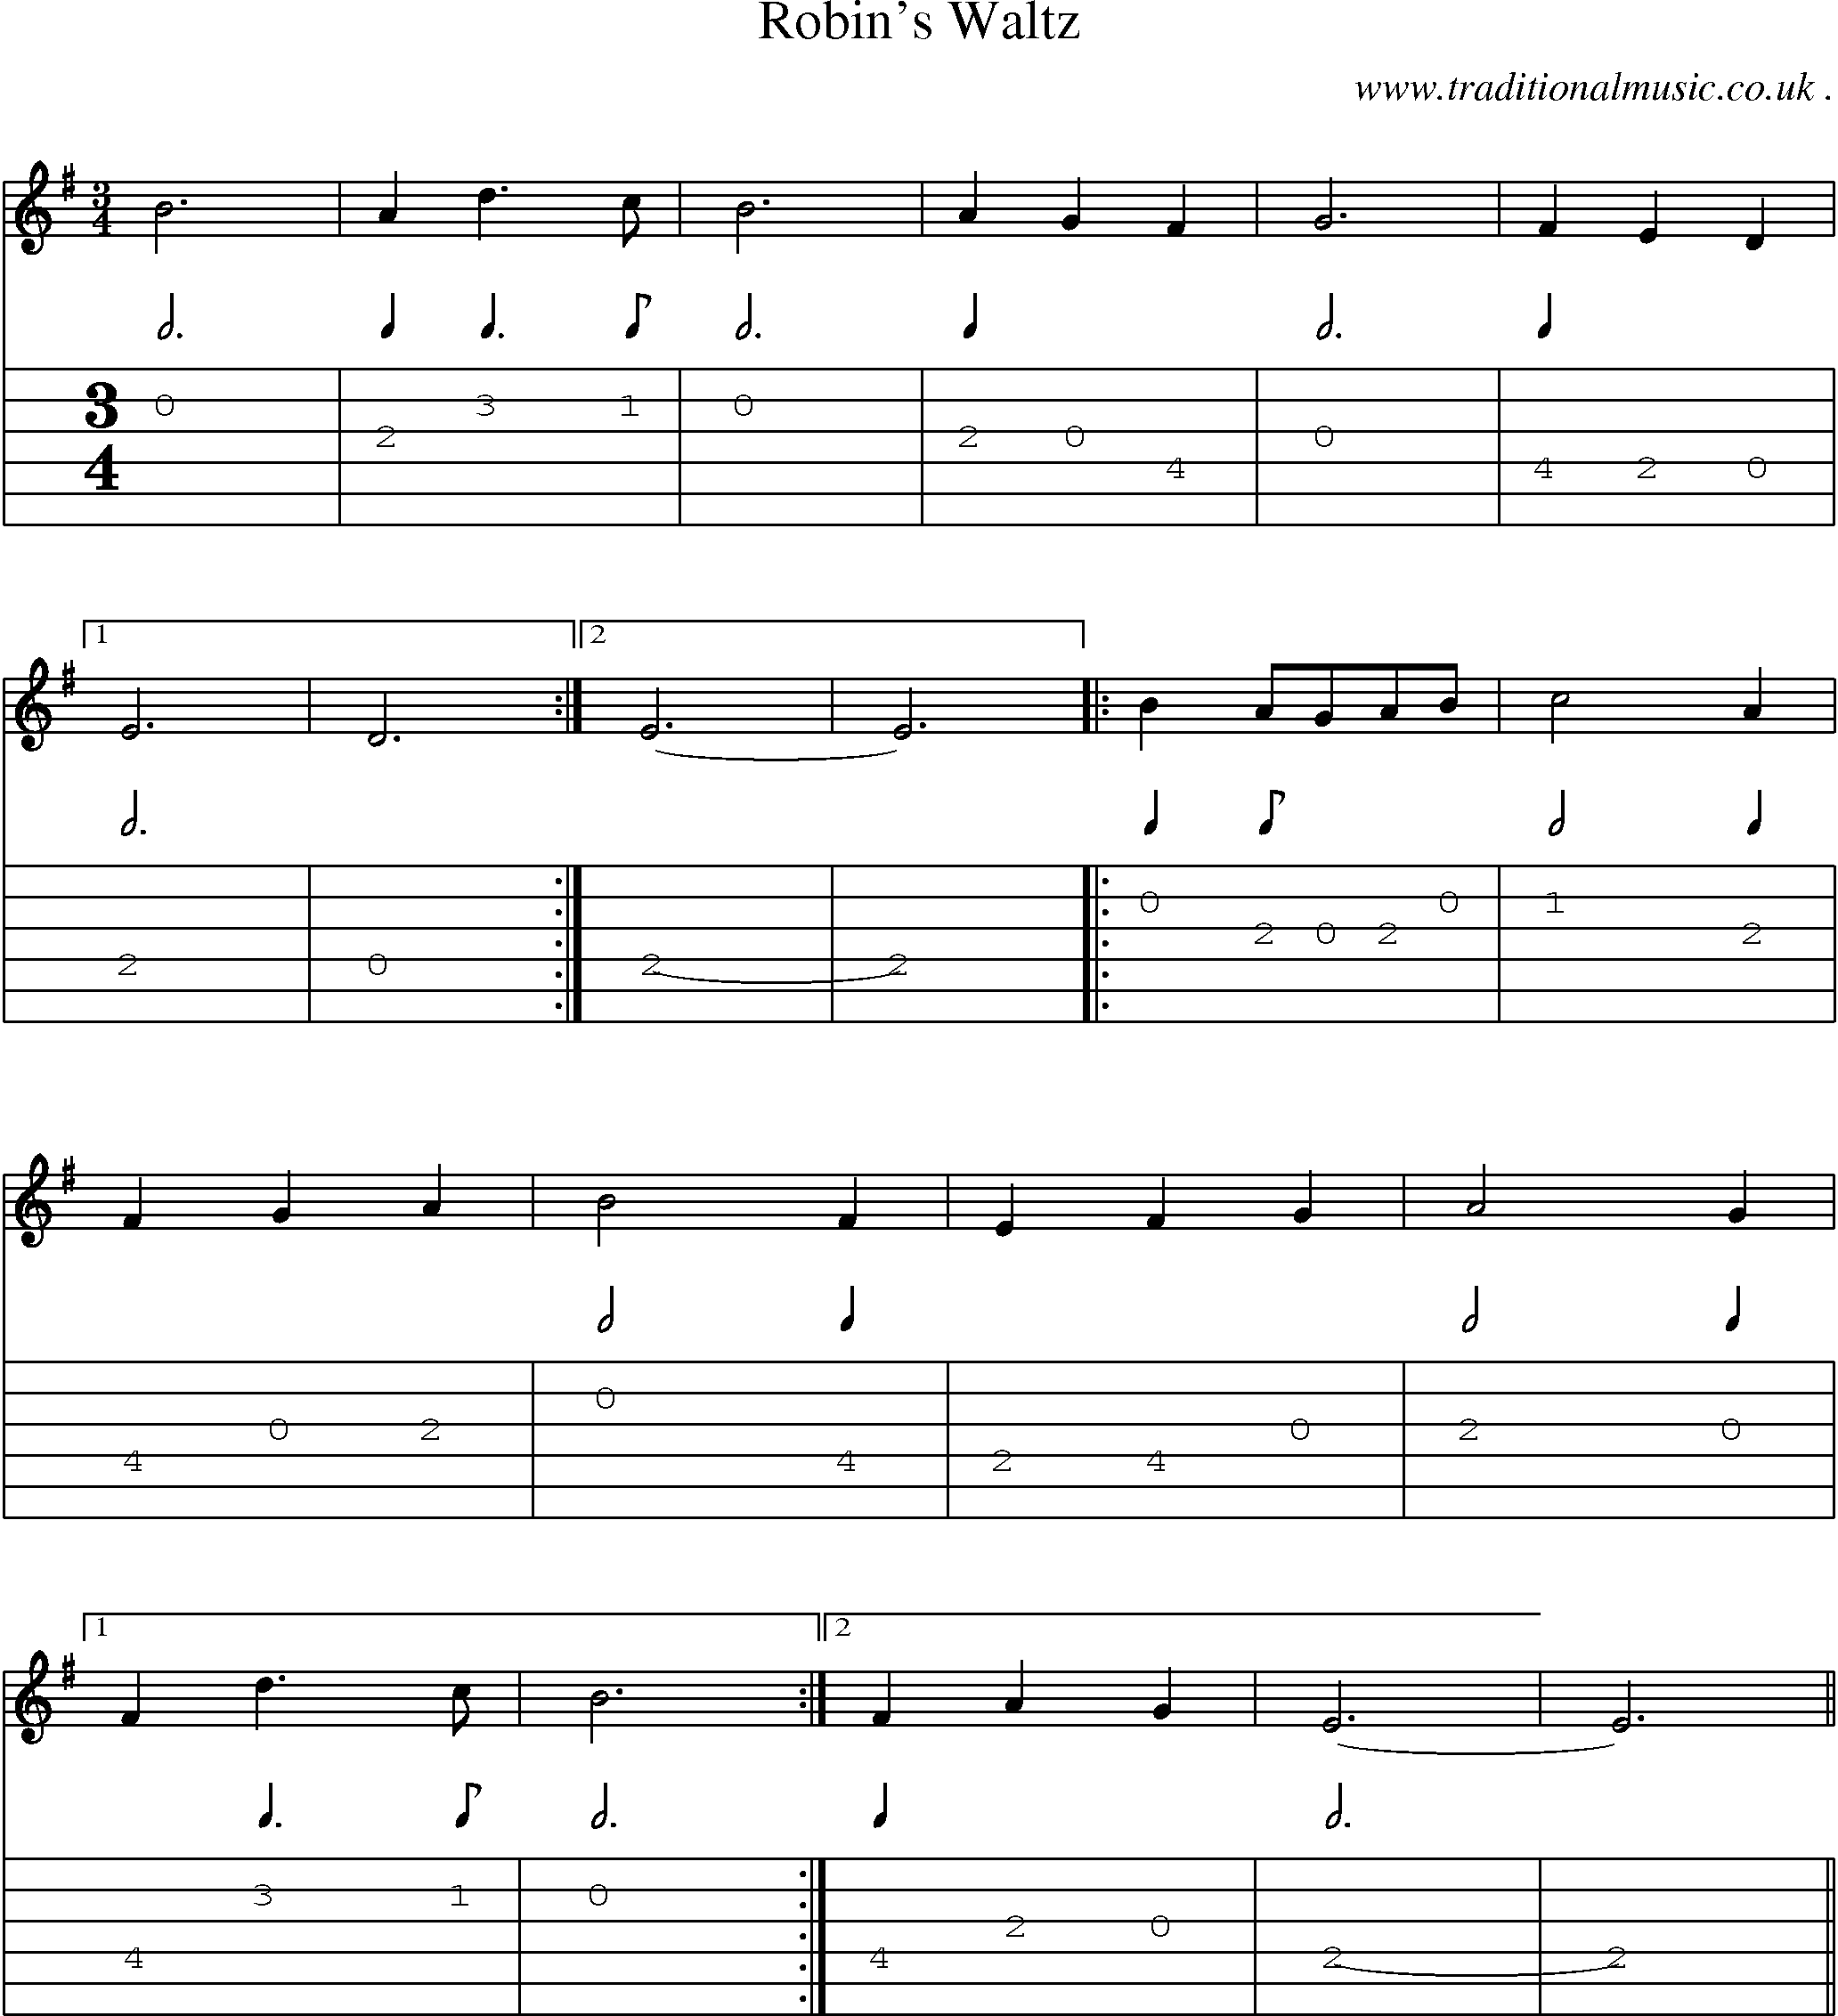 Sheet-Music and Guitar Tabs for Robins Waltz